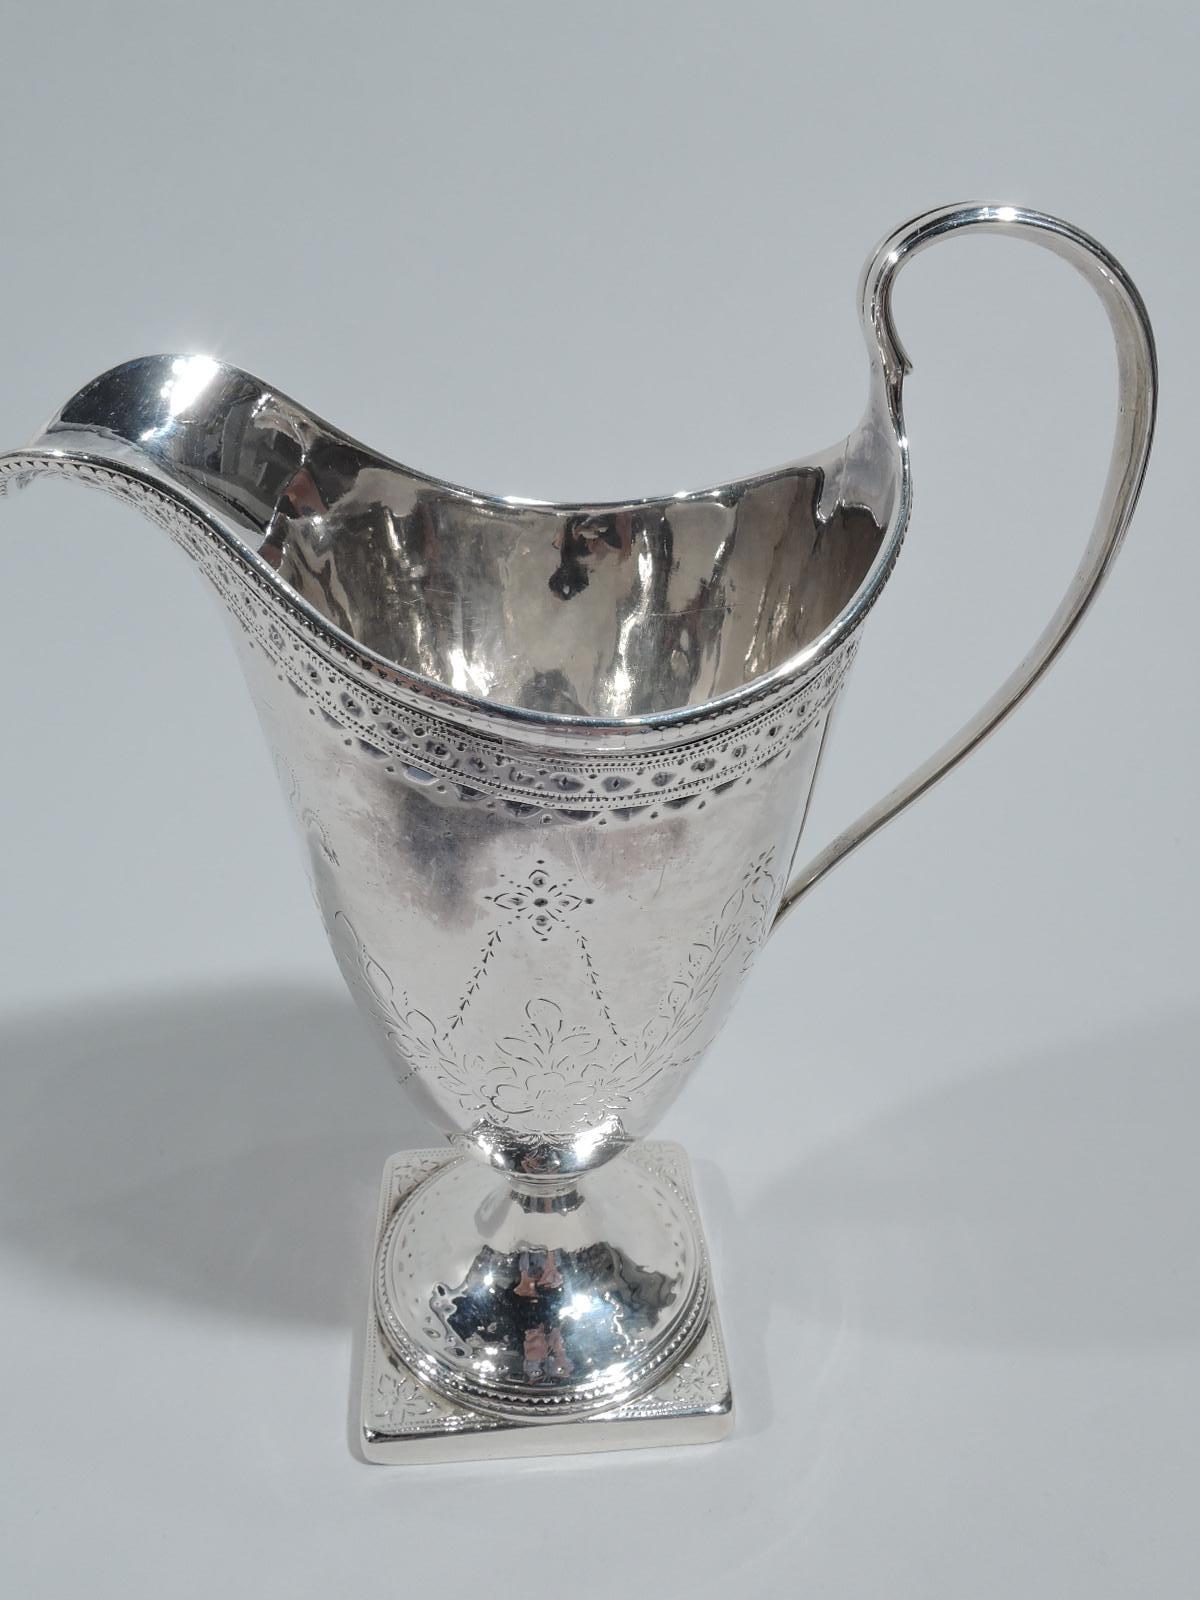 English Georgian neoclassical sterling silver creamer, 1786. Tall ovoid bowl with high-looping handle and helmet mouth; raised foot mounted to square base. Engraved pendant flowers and wreath cartouche (vacant). Fully marked including London assay